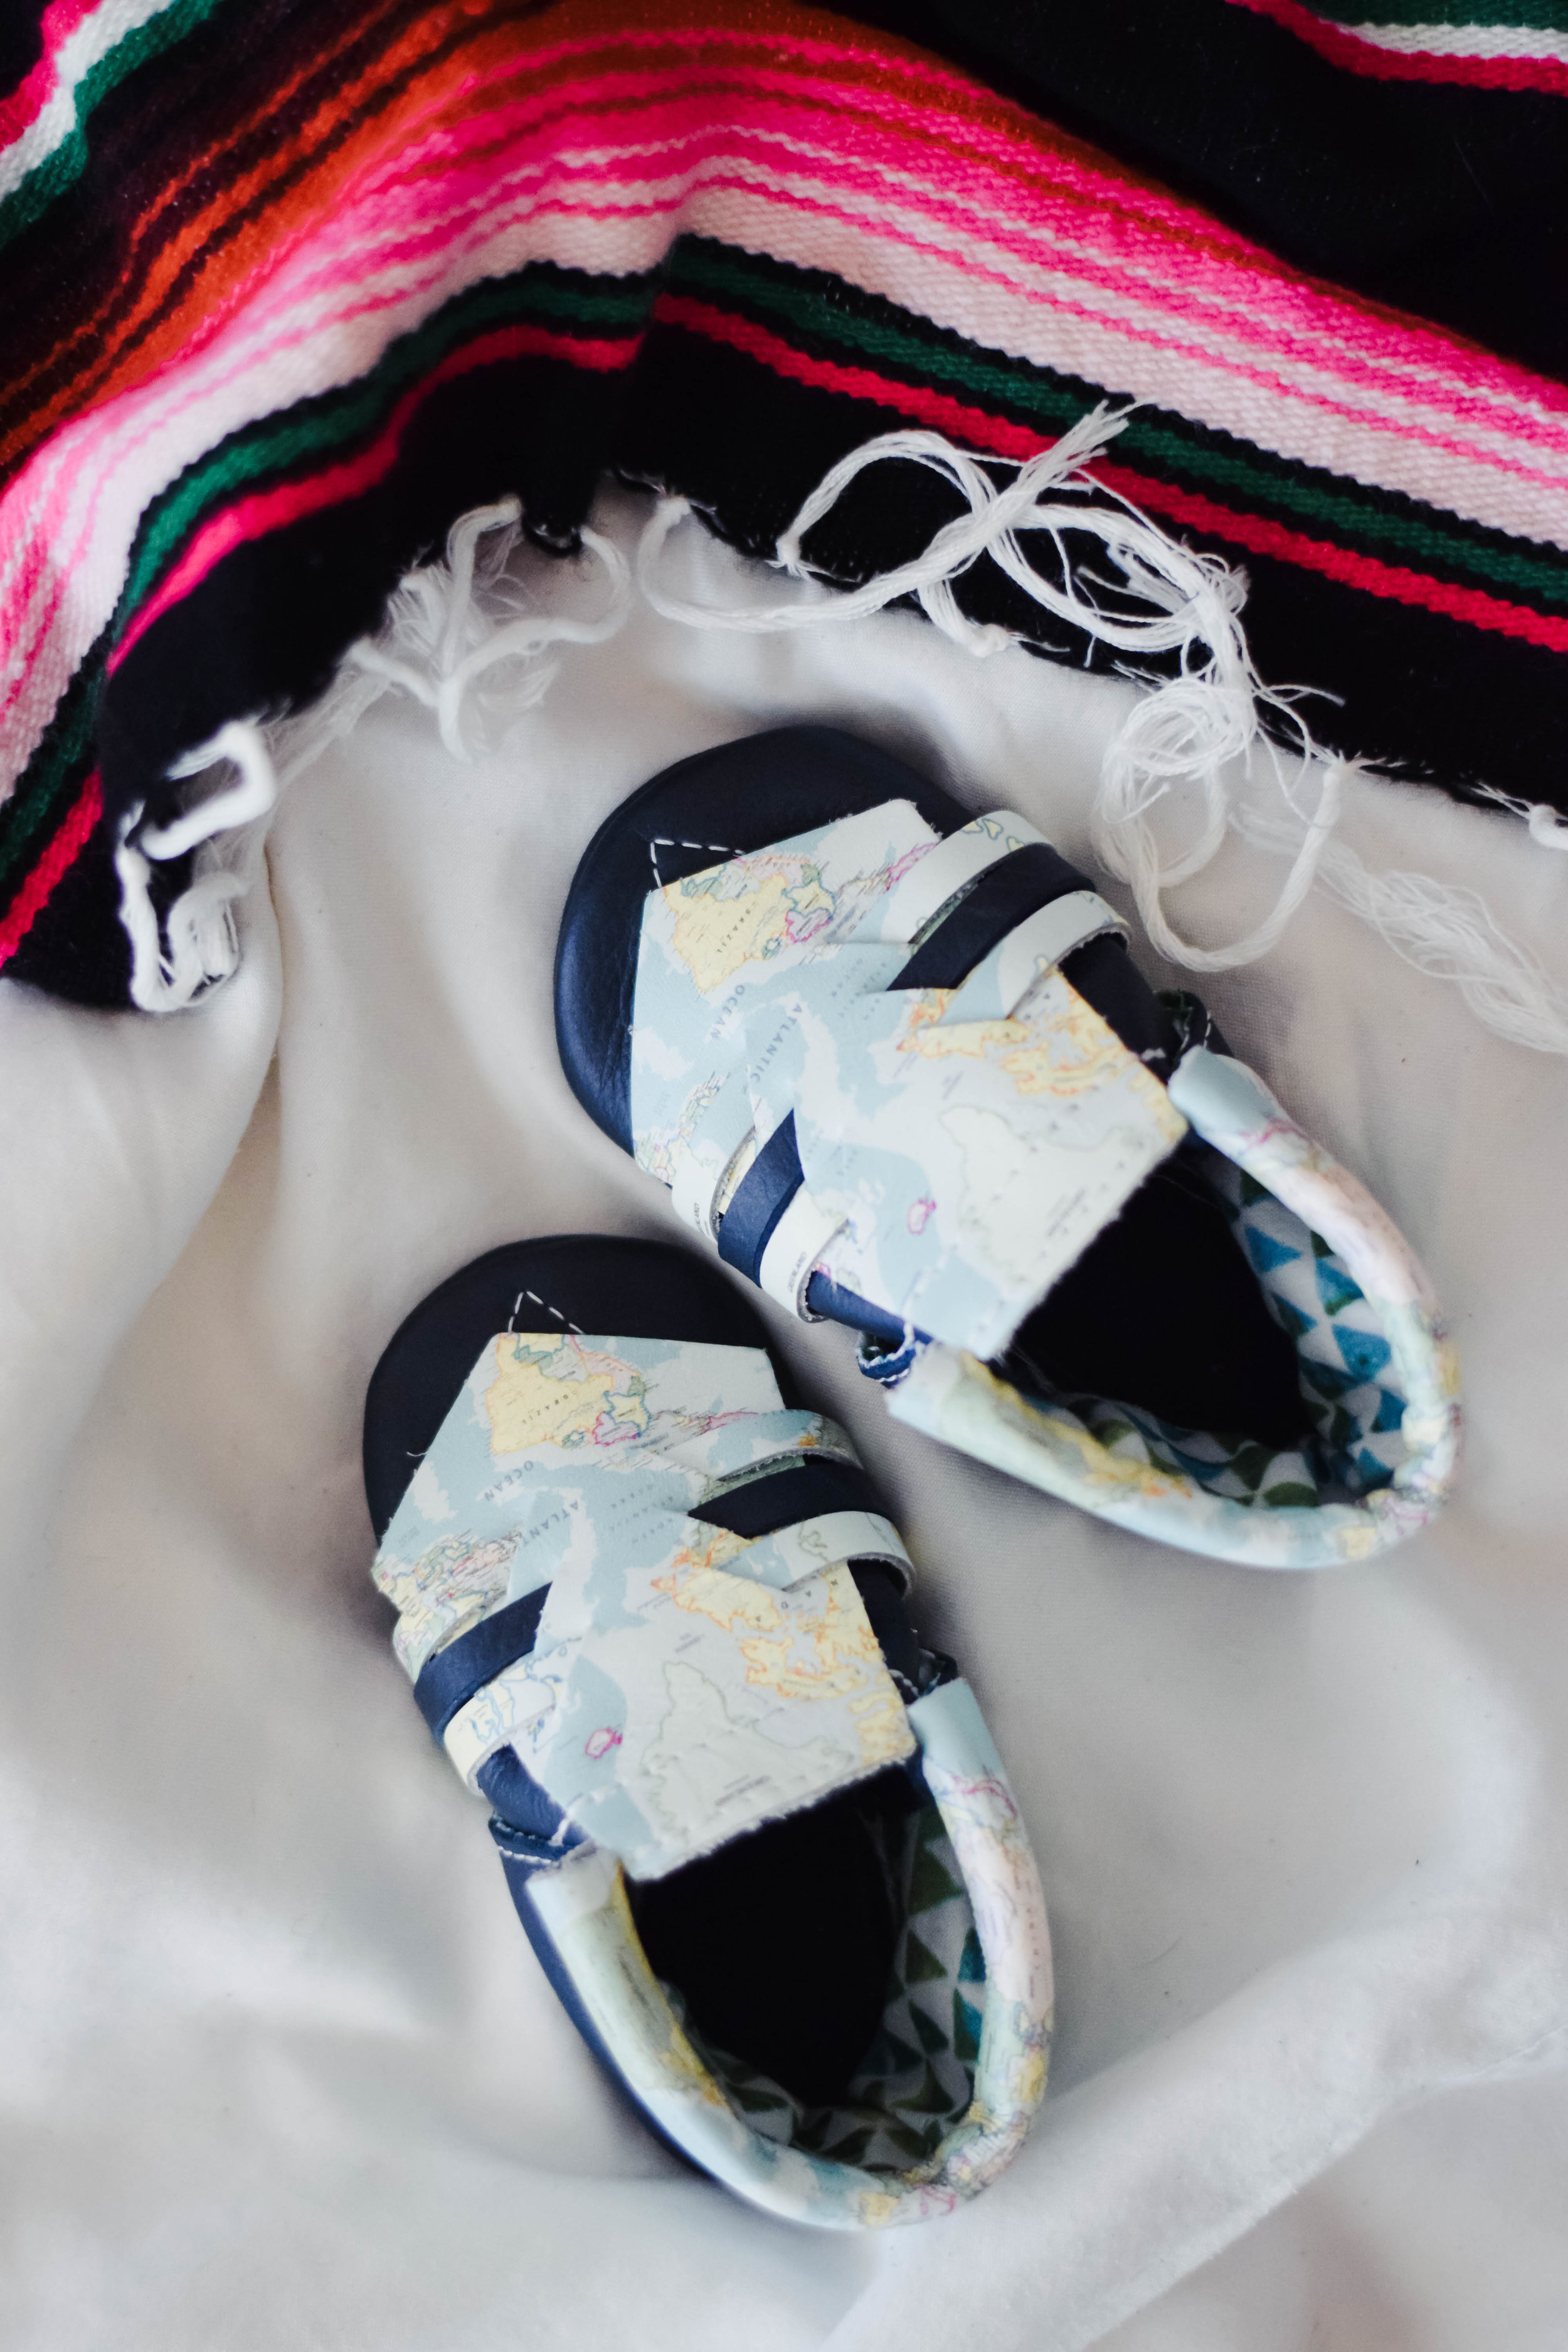 Kinbe - Moccasins That Grow With Your Baby's Feet - Socially Conscious Kids Fashion - Kinbe Village Drive